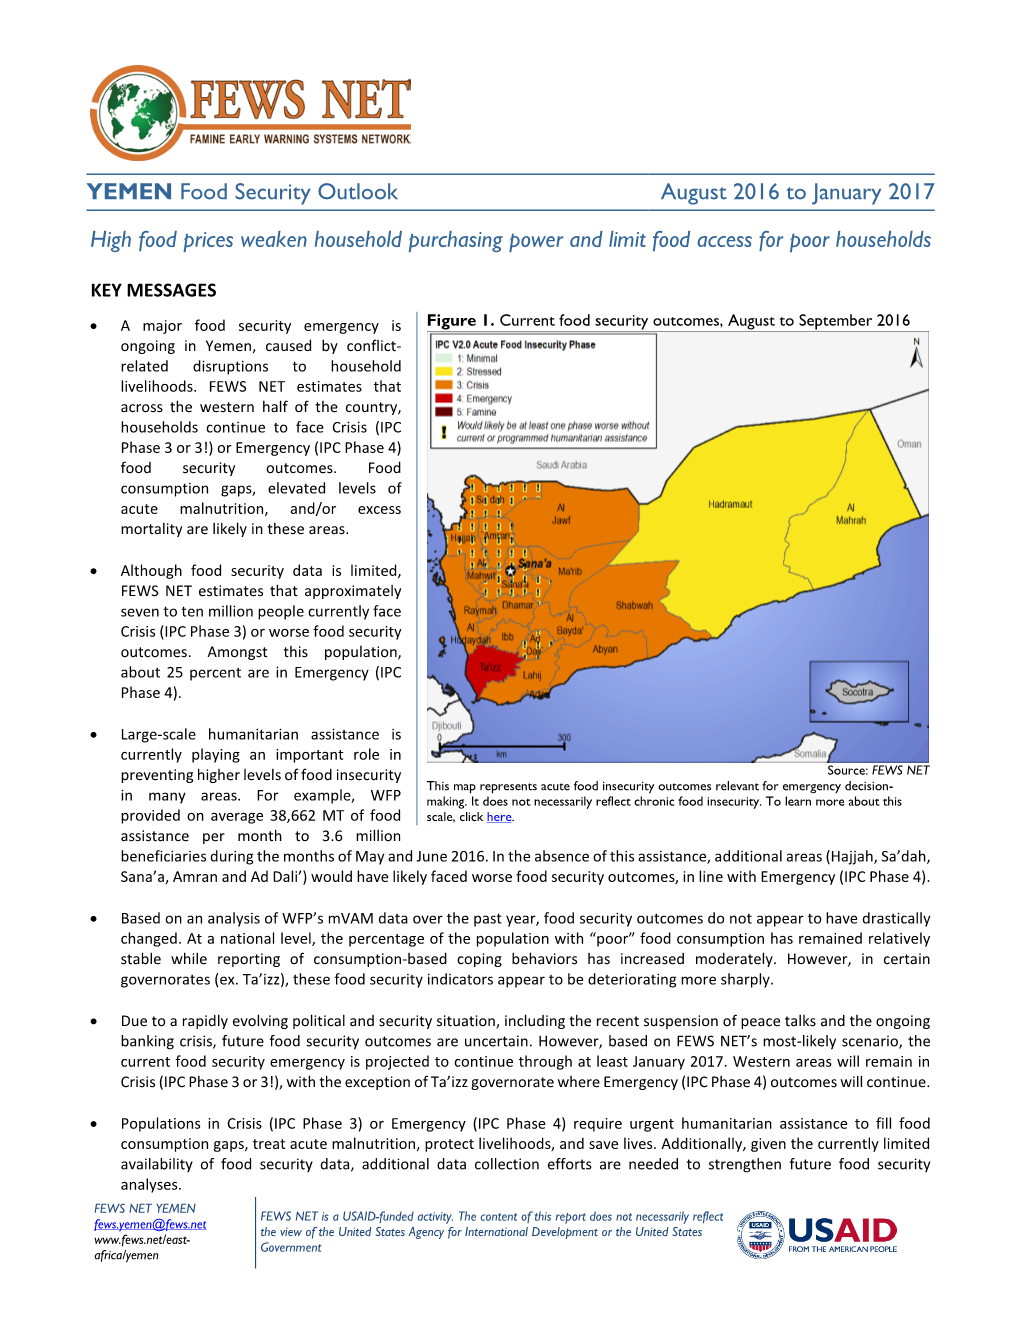 YEMEN Food Security Outlook August 2016 to January 2017